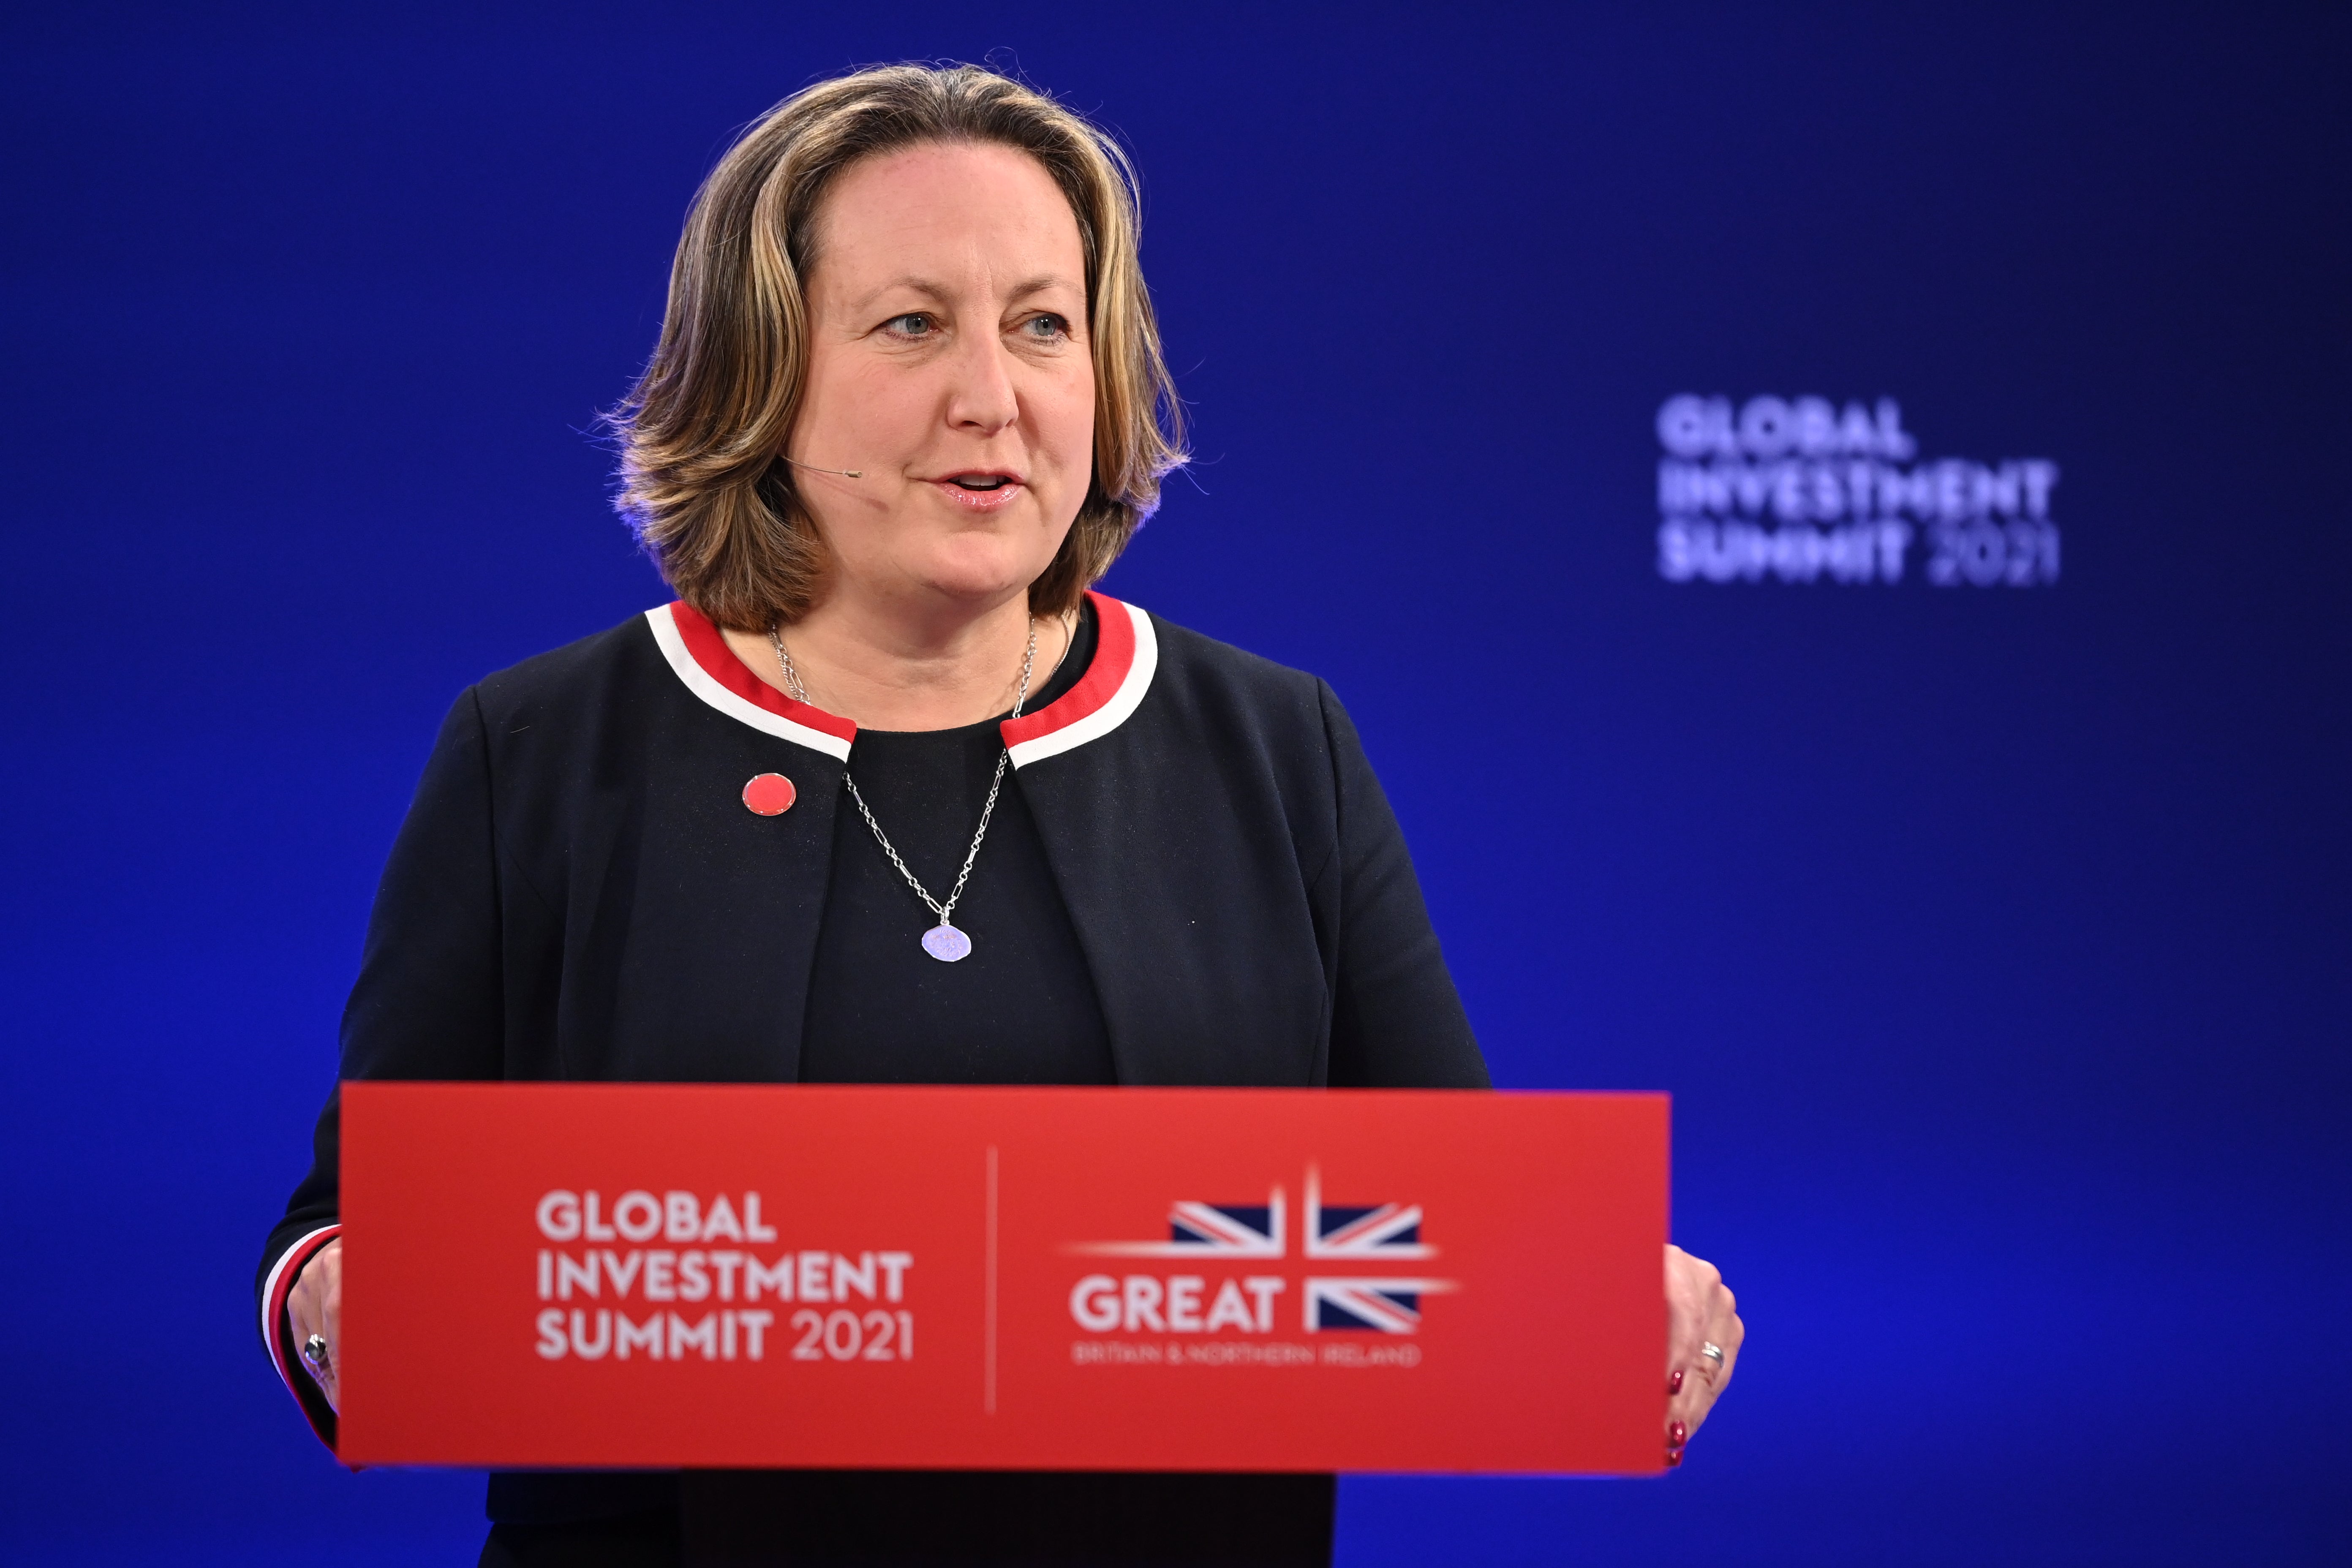 International trade secretary Anne-Marie Trevelyan will host talks with counterparts on Friday in one of the UK’s last events before it hands over the G7 presidency to Germany in 2022